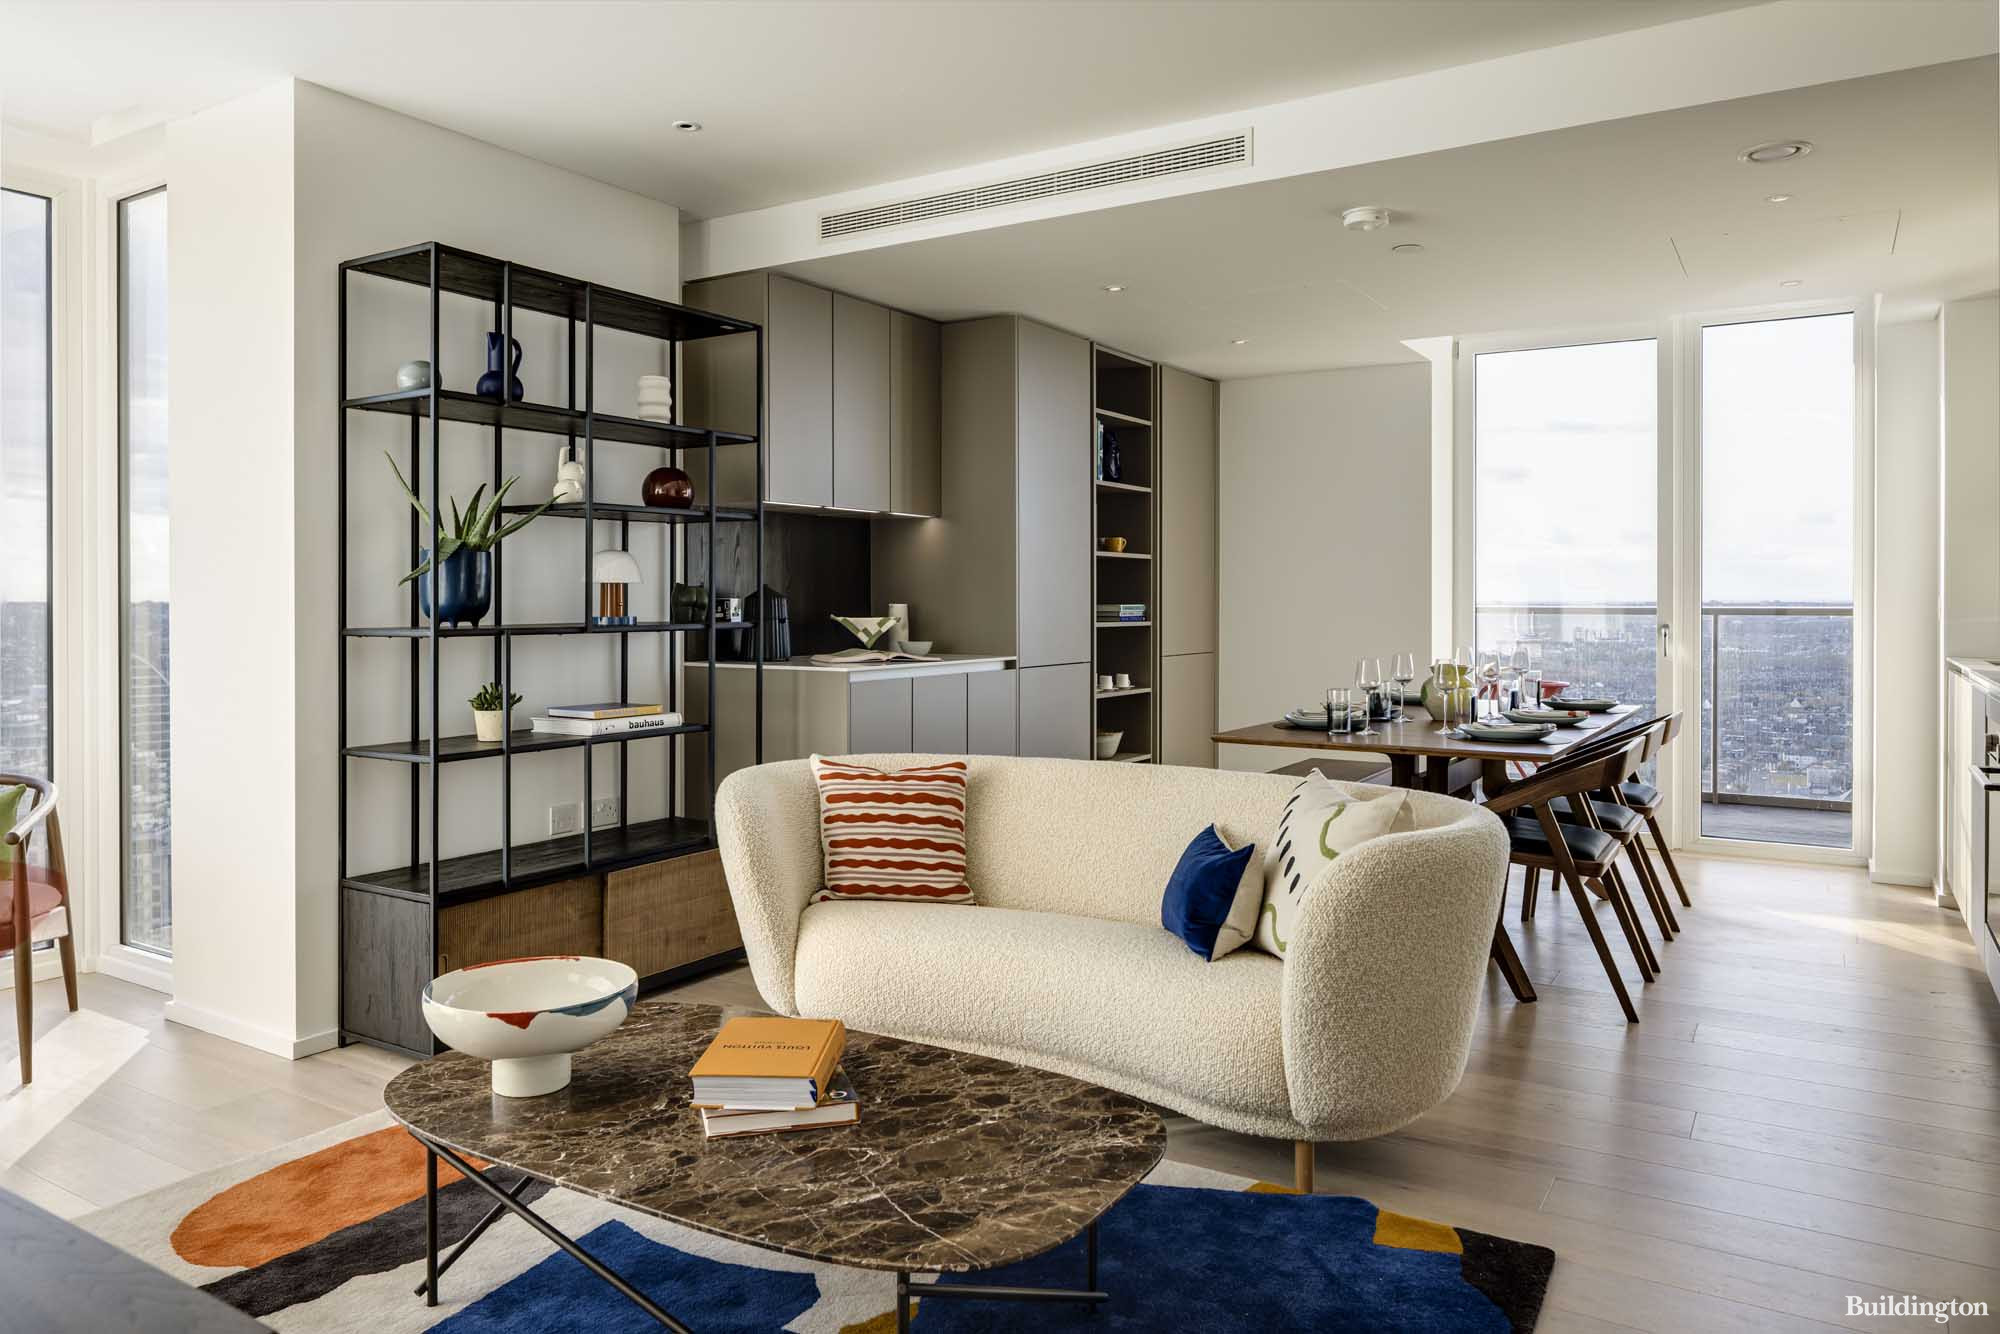 The new show apartment designed by The Conran Shop is subtly divided by loose furniture, giving way to a zoned dining area, designed with socialising in mind.